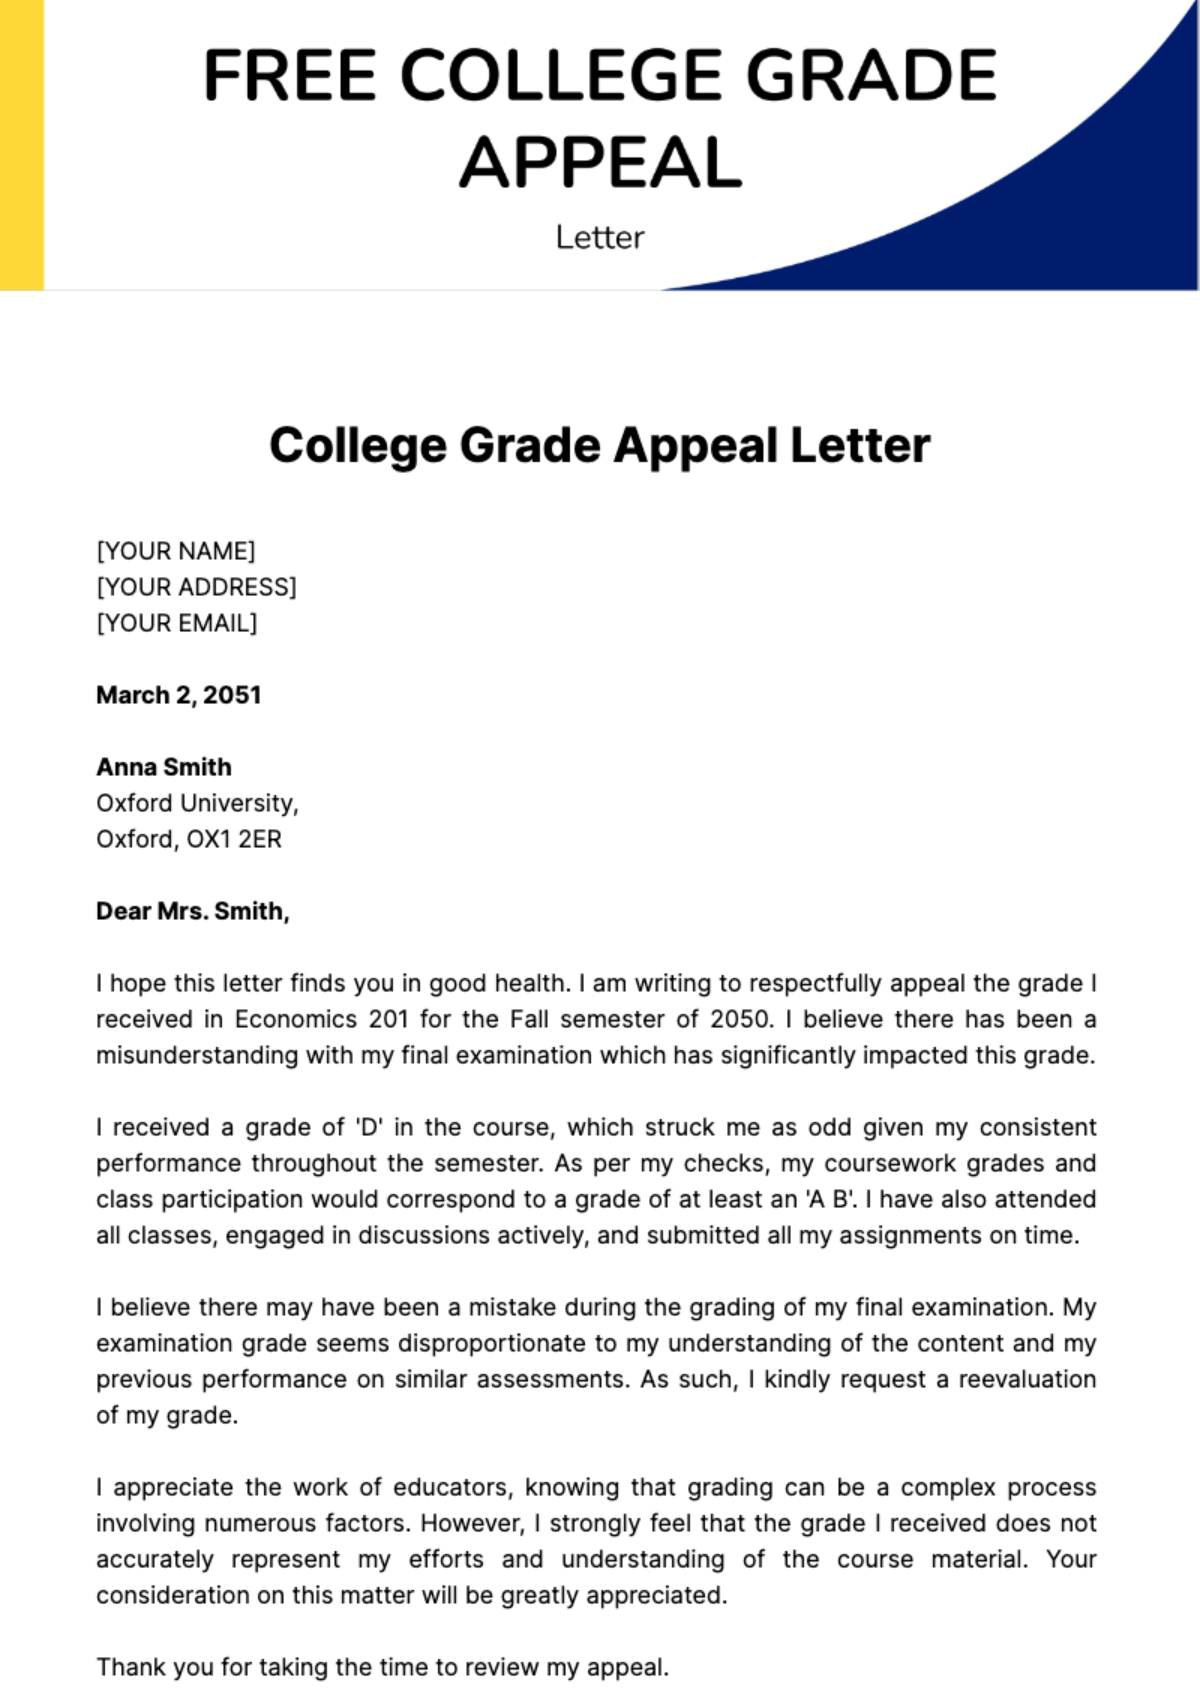 Free College Grade Appeal Letter Template